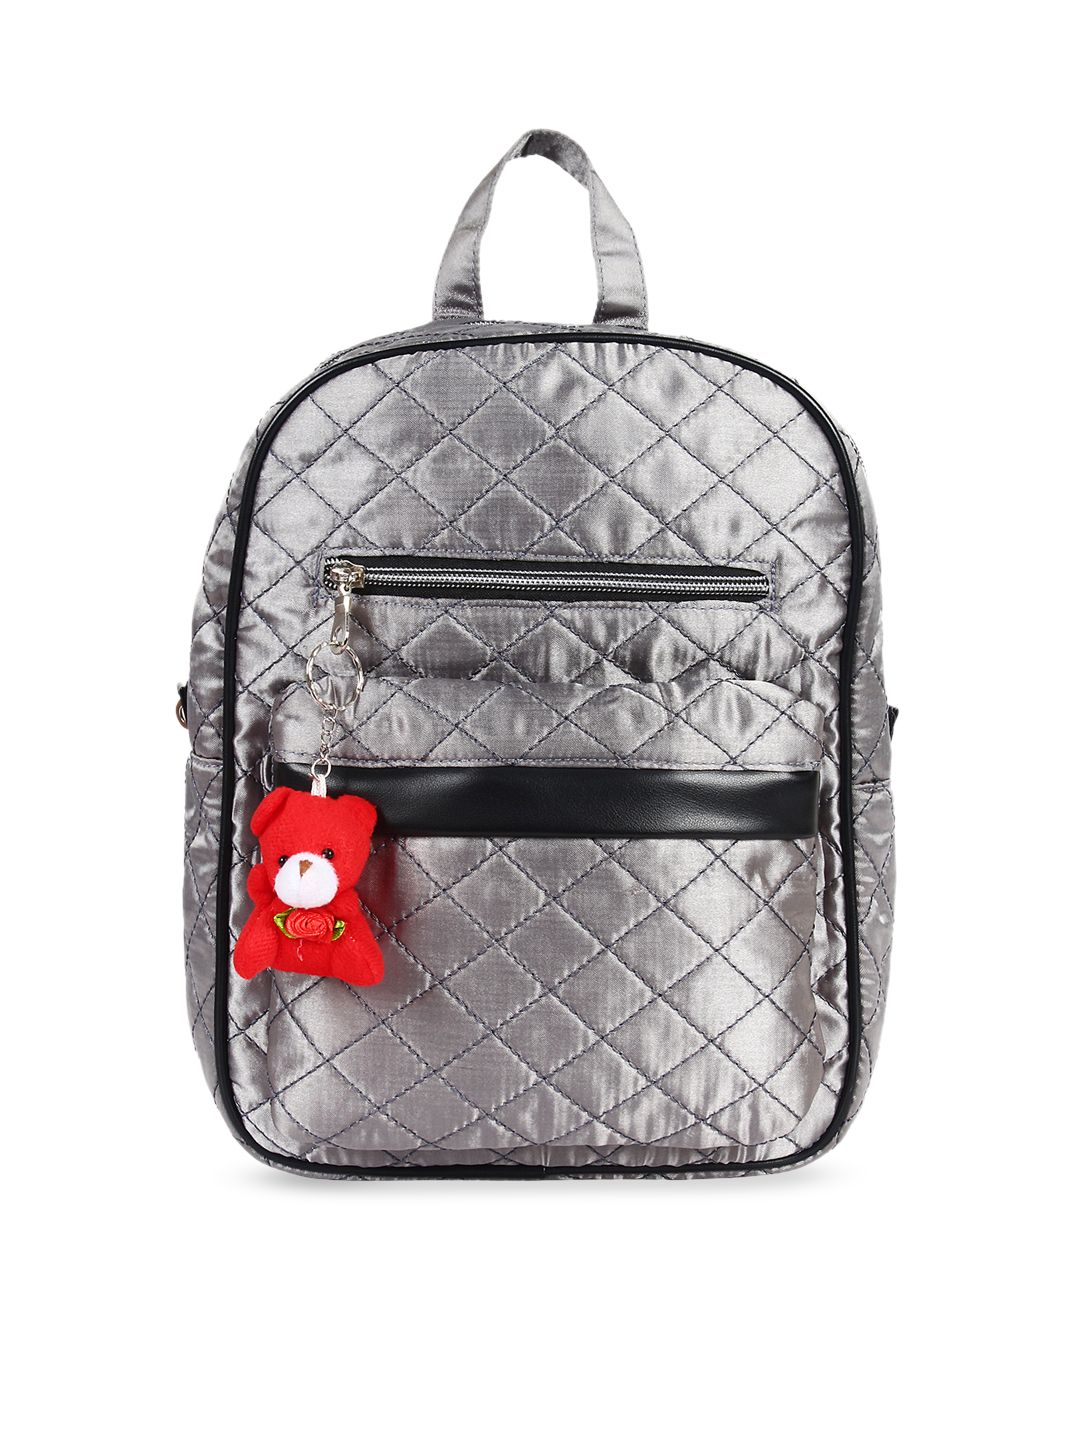 Anekaant Women Silver-Toned & Black Geometric Backpack Price in India